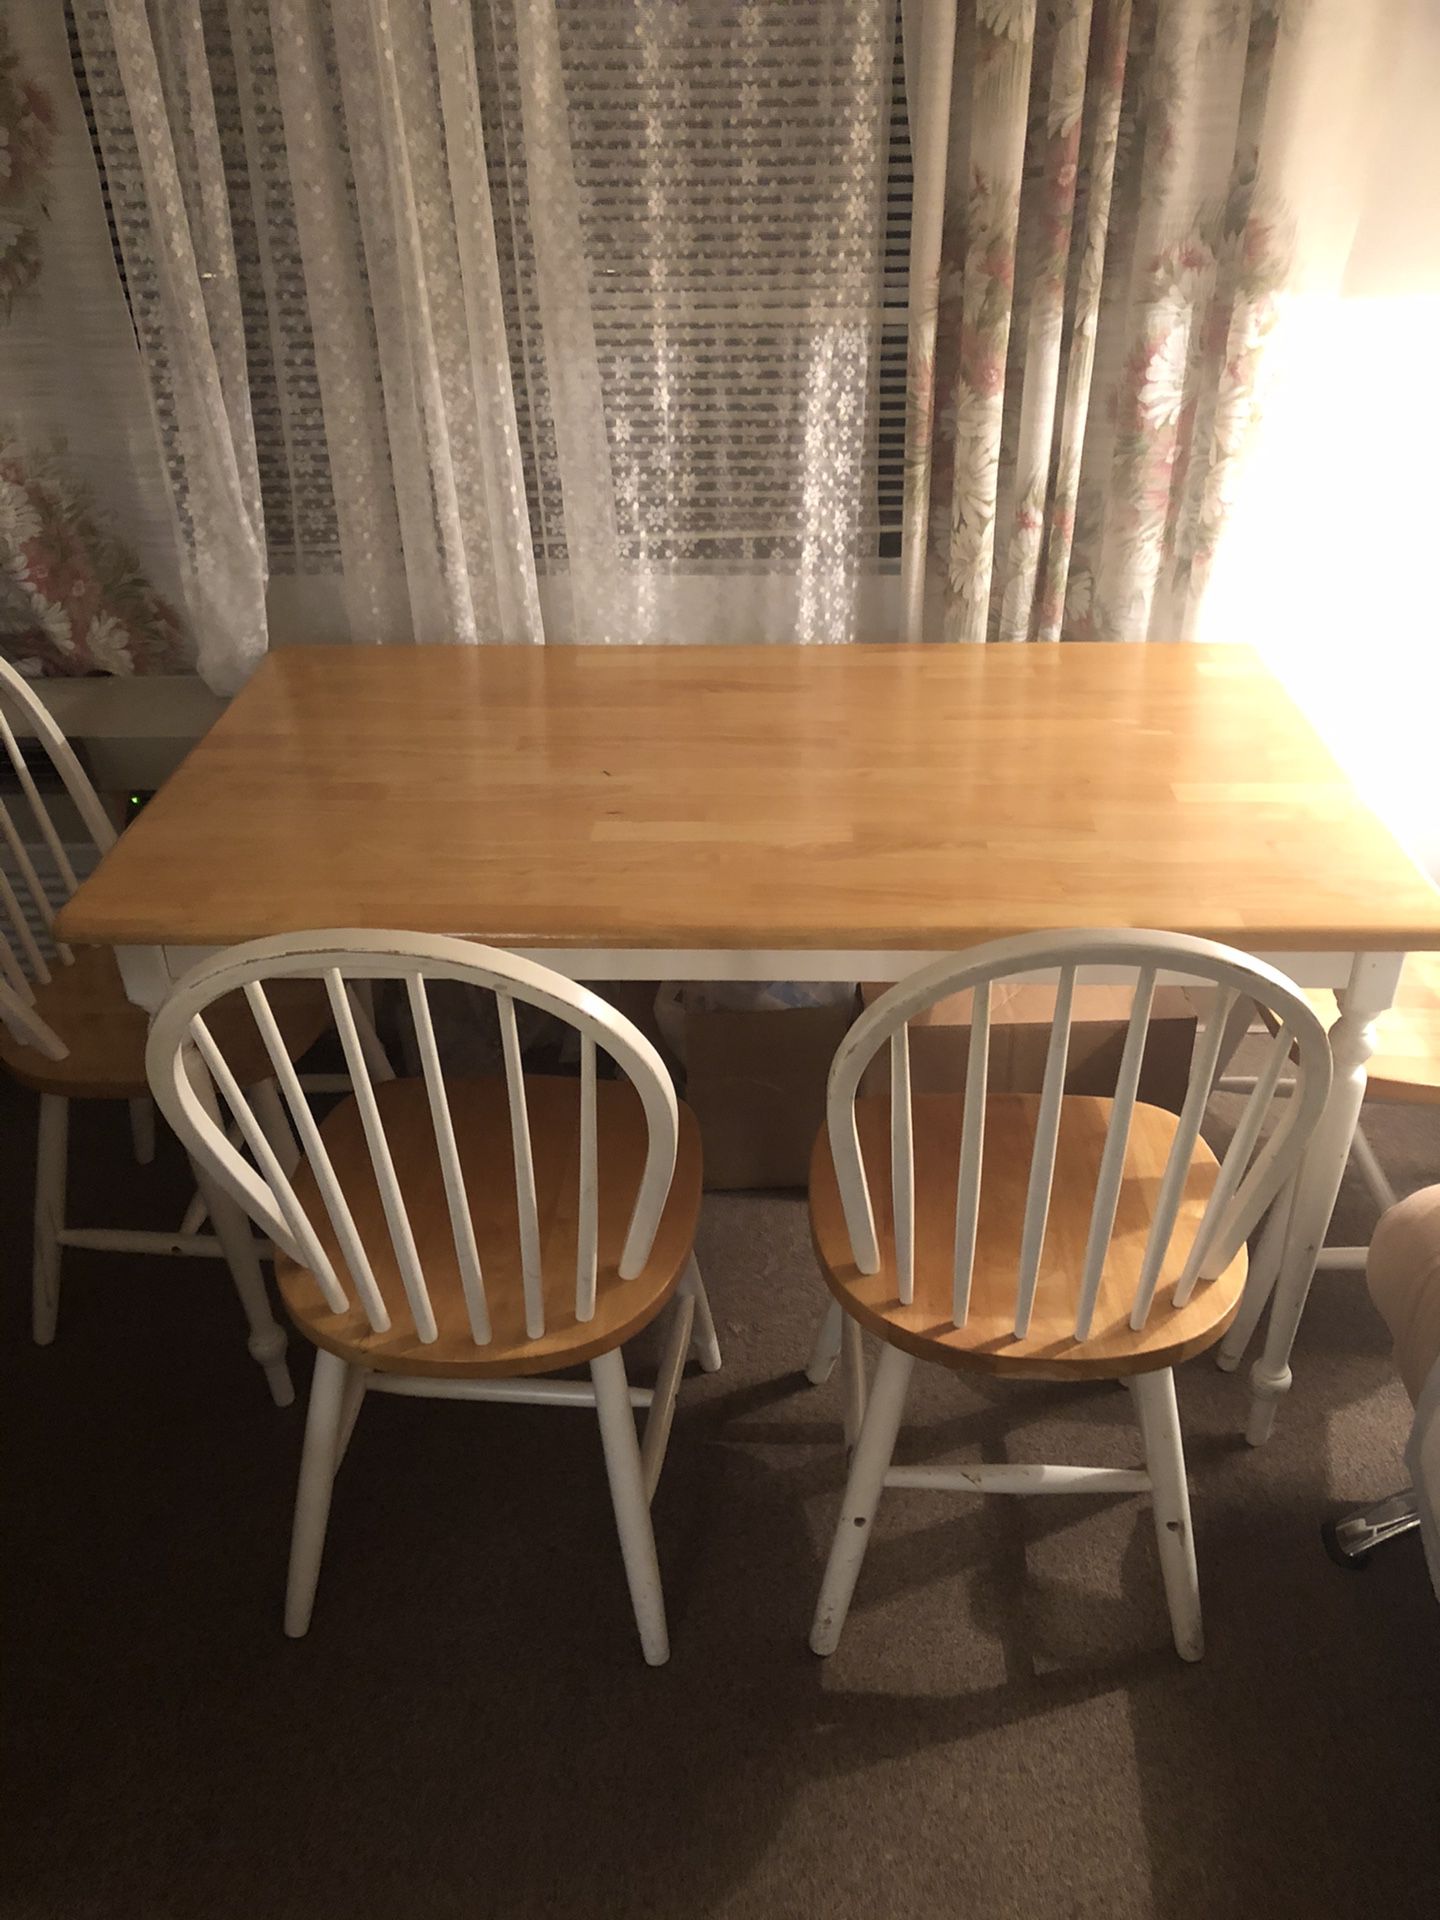 Dining room wooden set: table and 4 chairs